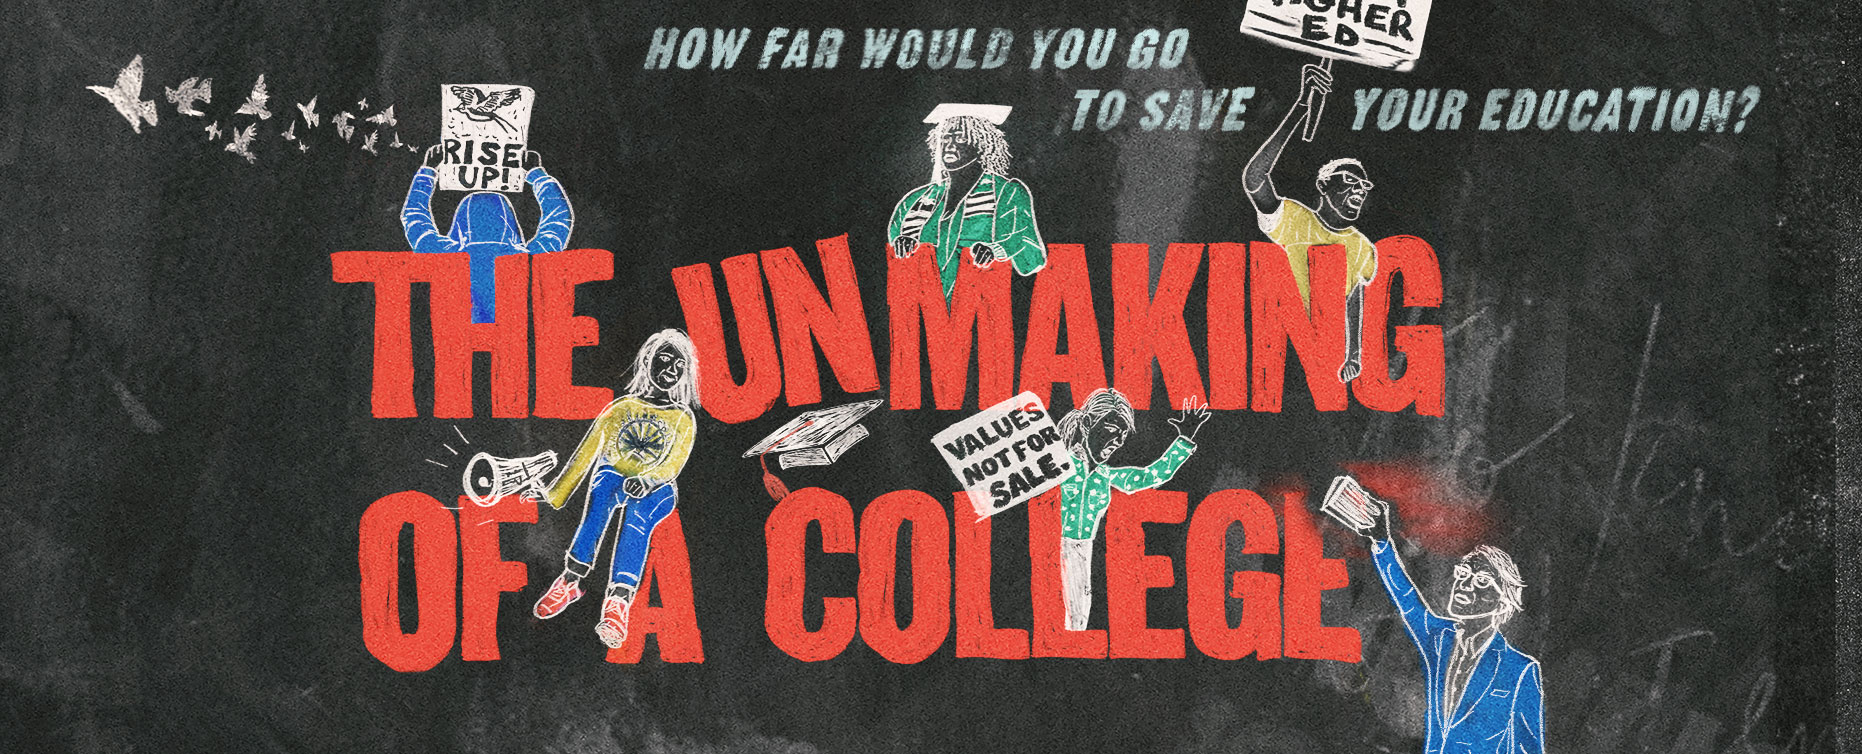 THE UNMAKING OF A COLLEGE